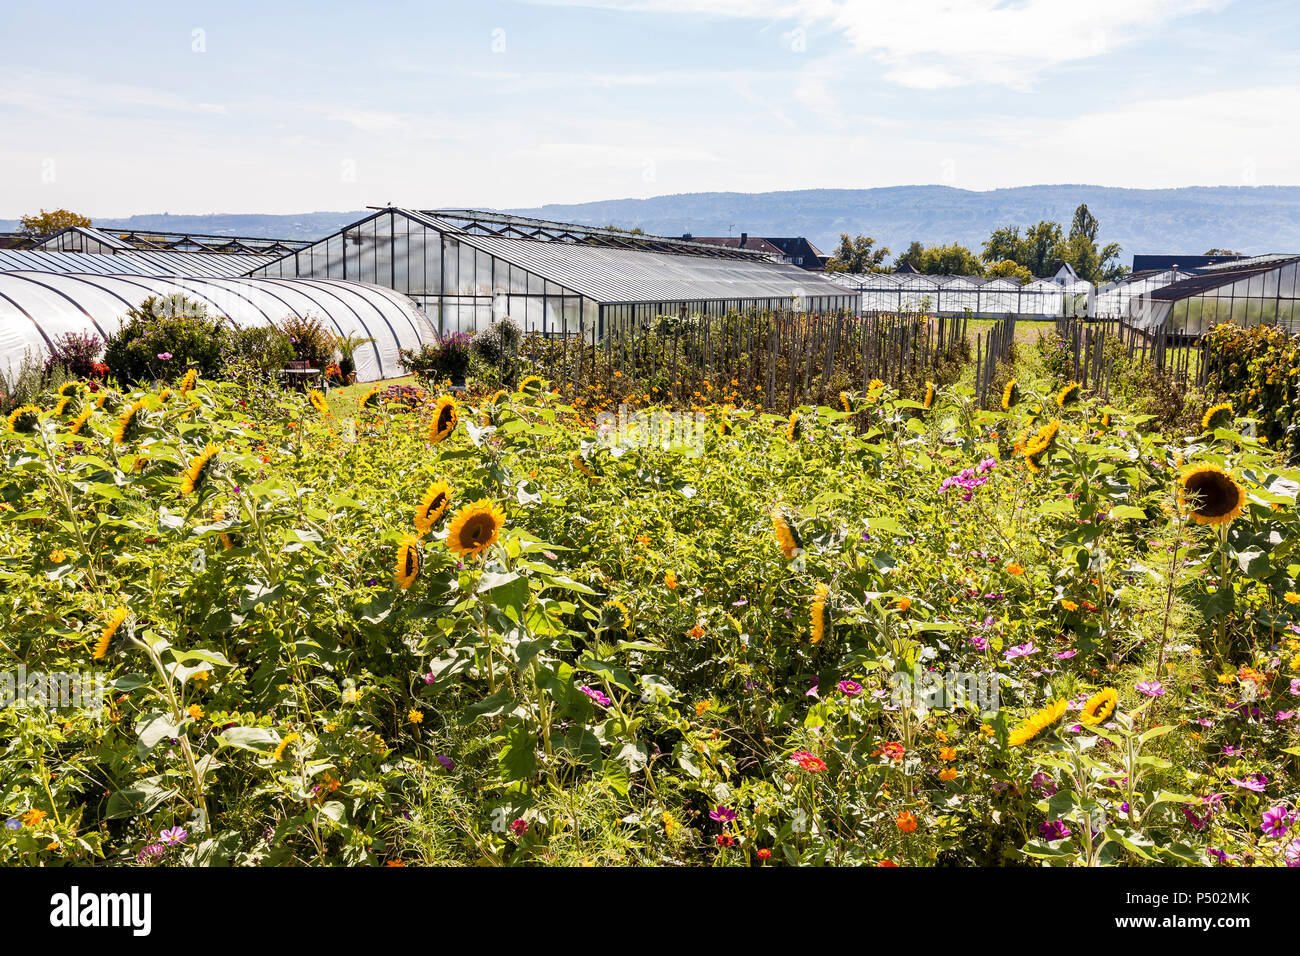 Germany, Constance district, Reichenau Island, greenhouses and sunflowers in the foreground Stock Photo